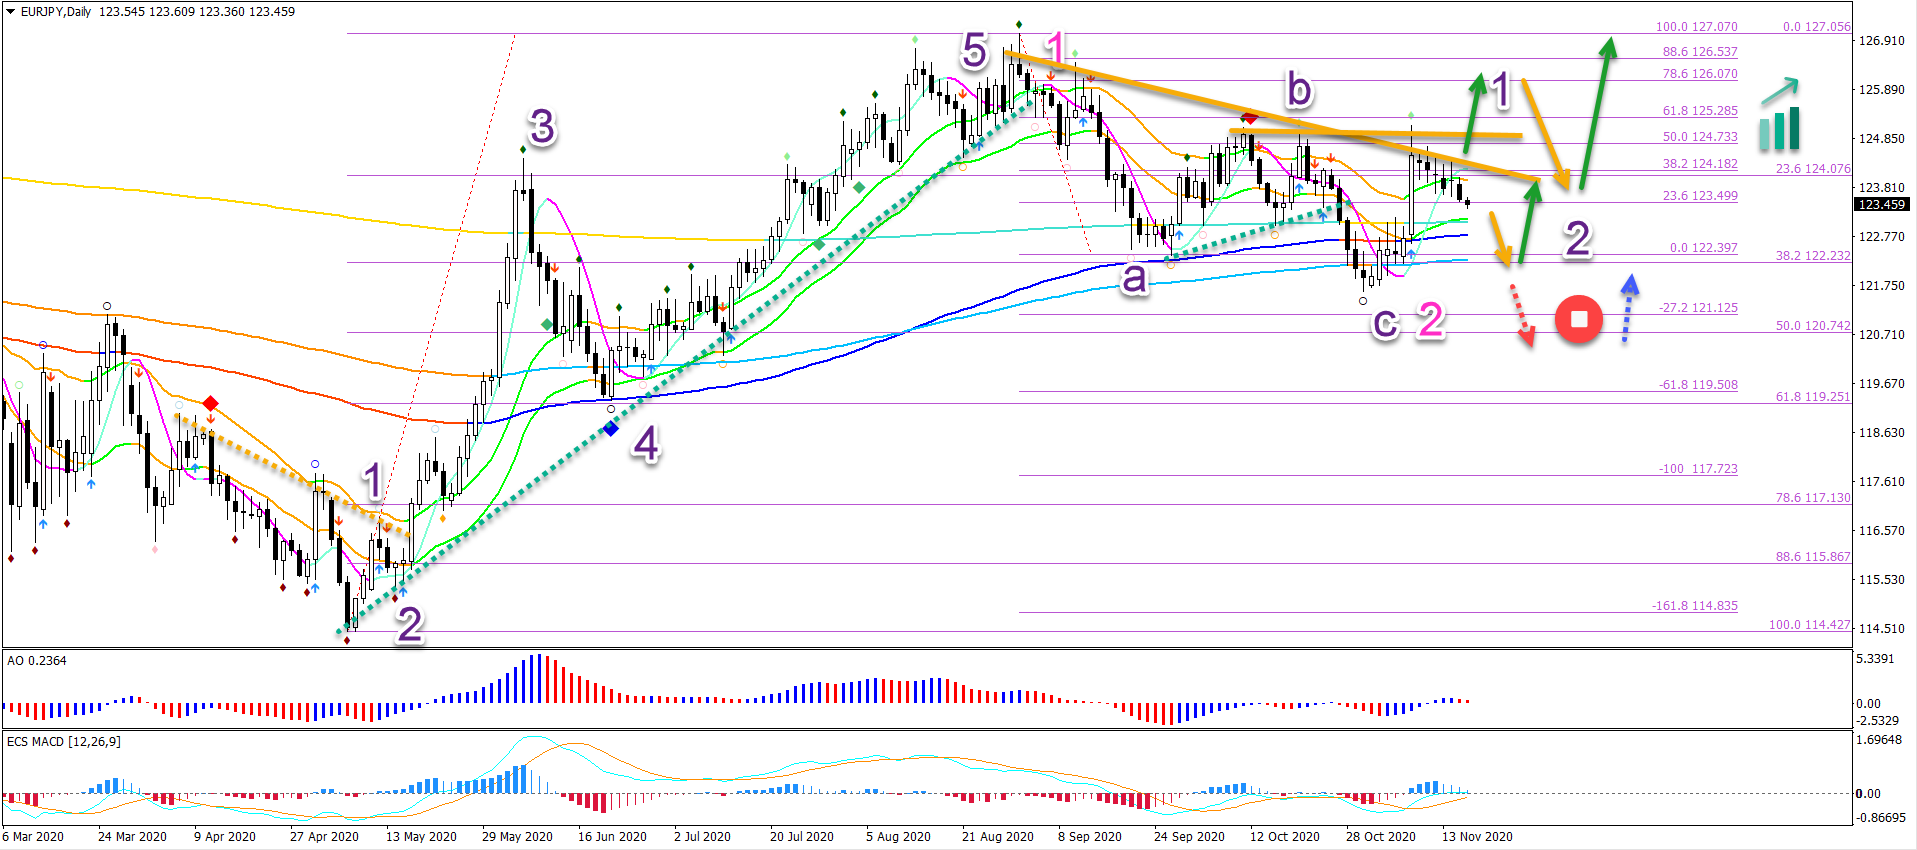 EUR/JPY daily chart